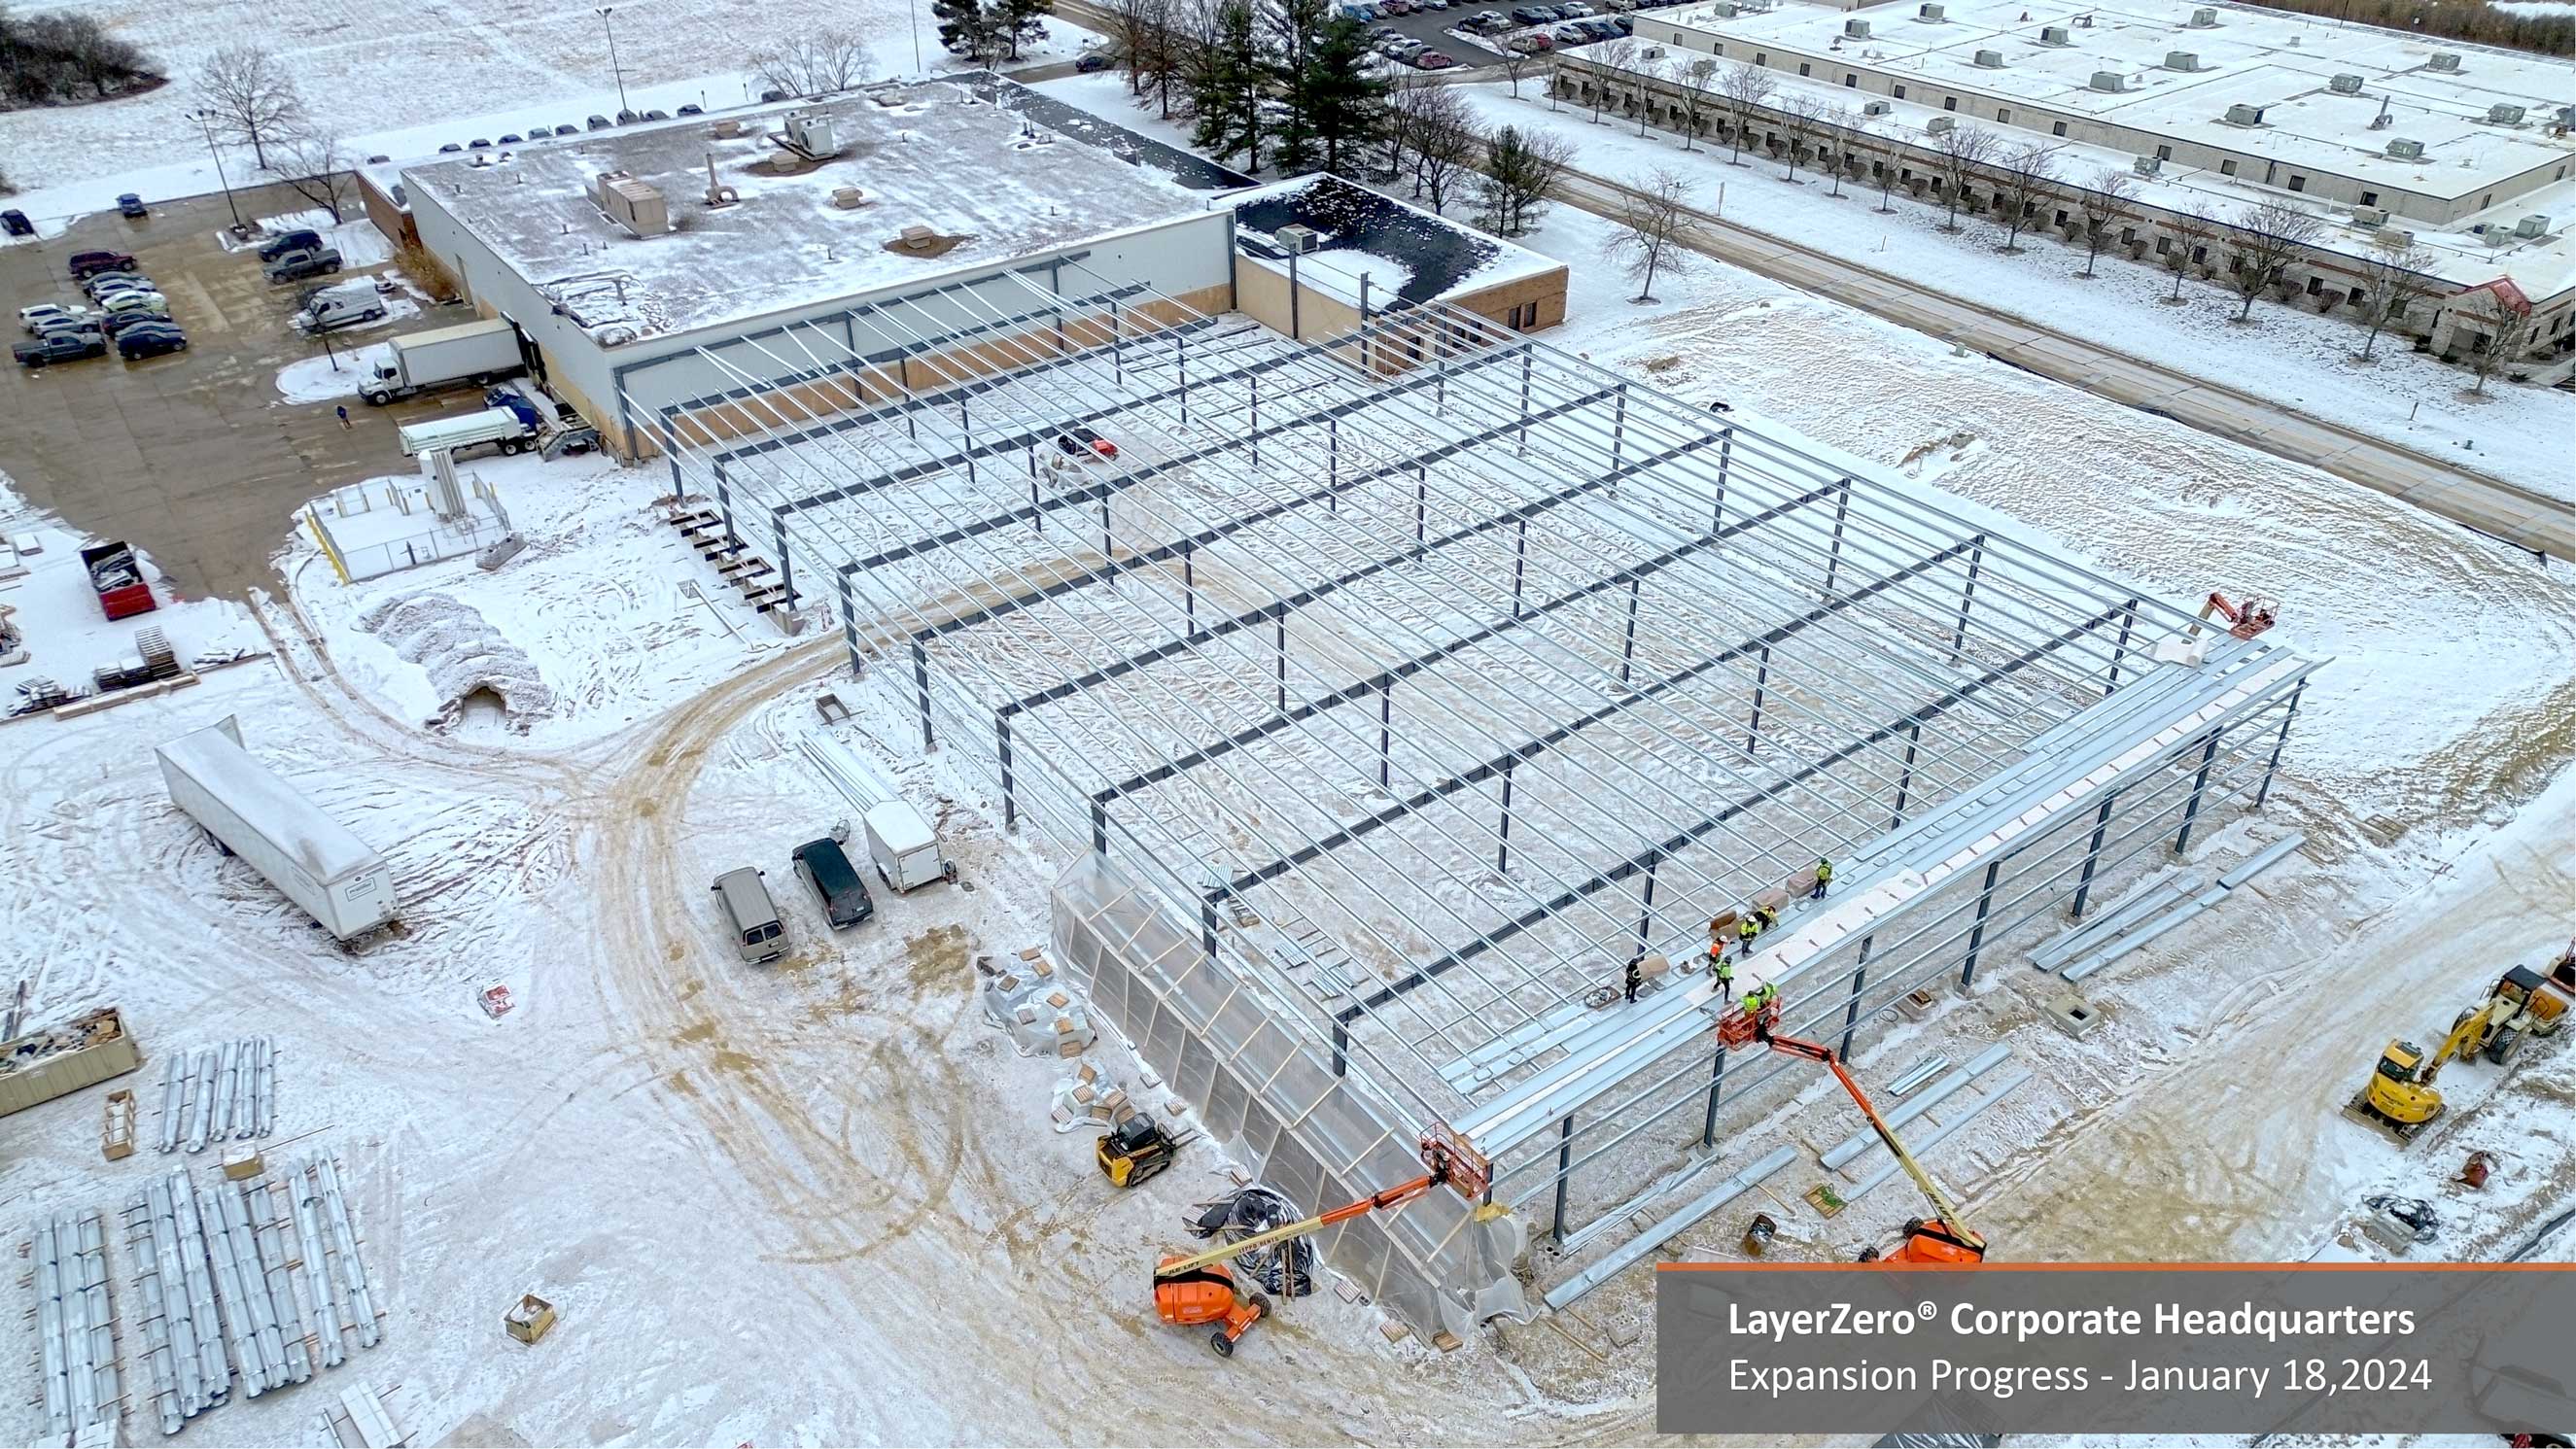 The roof is being installed at the LayerZero Expansion Project